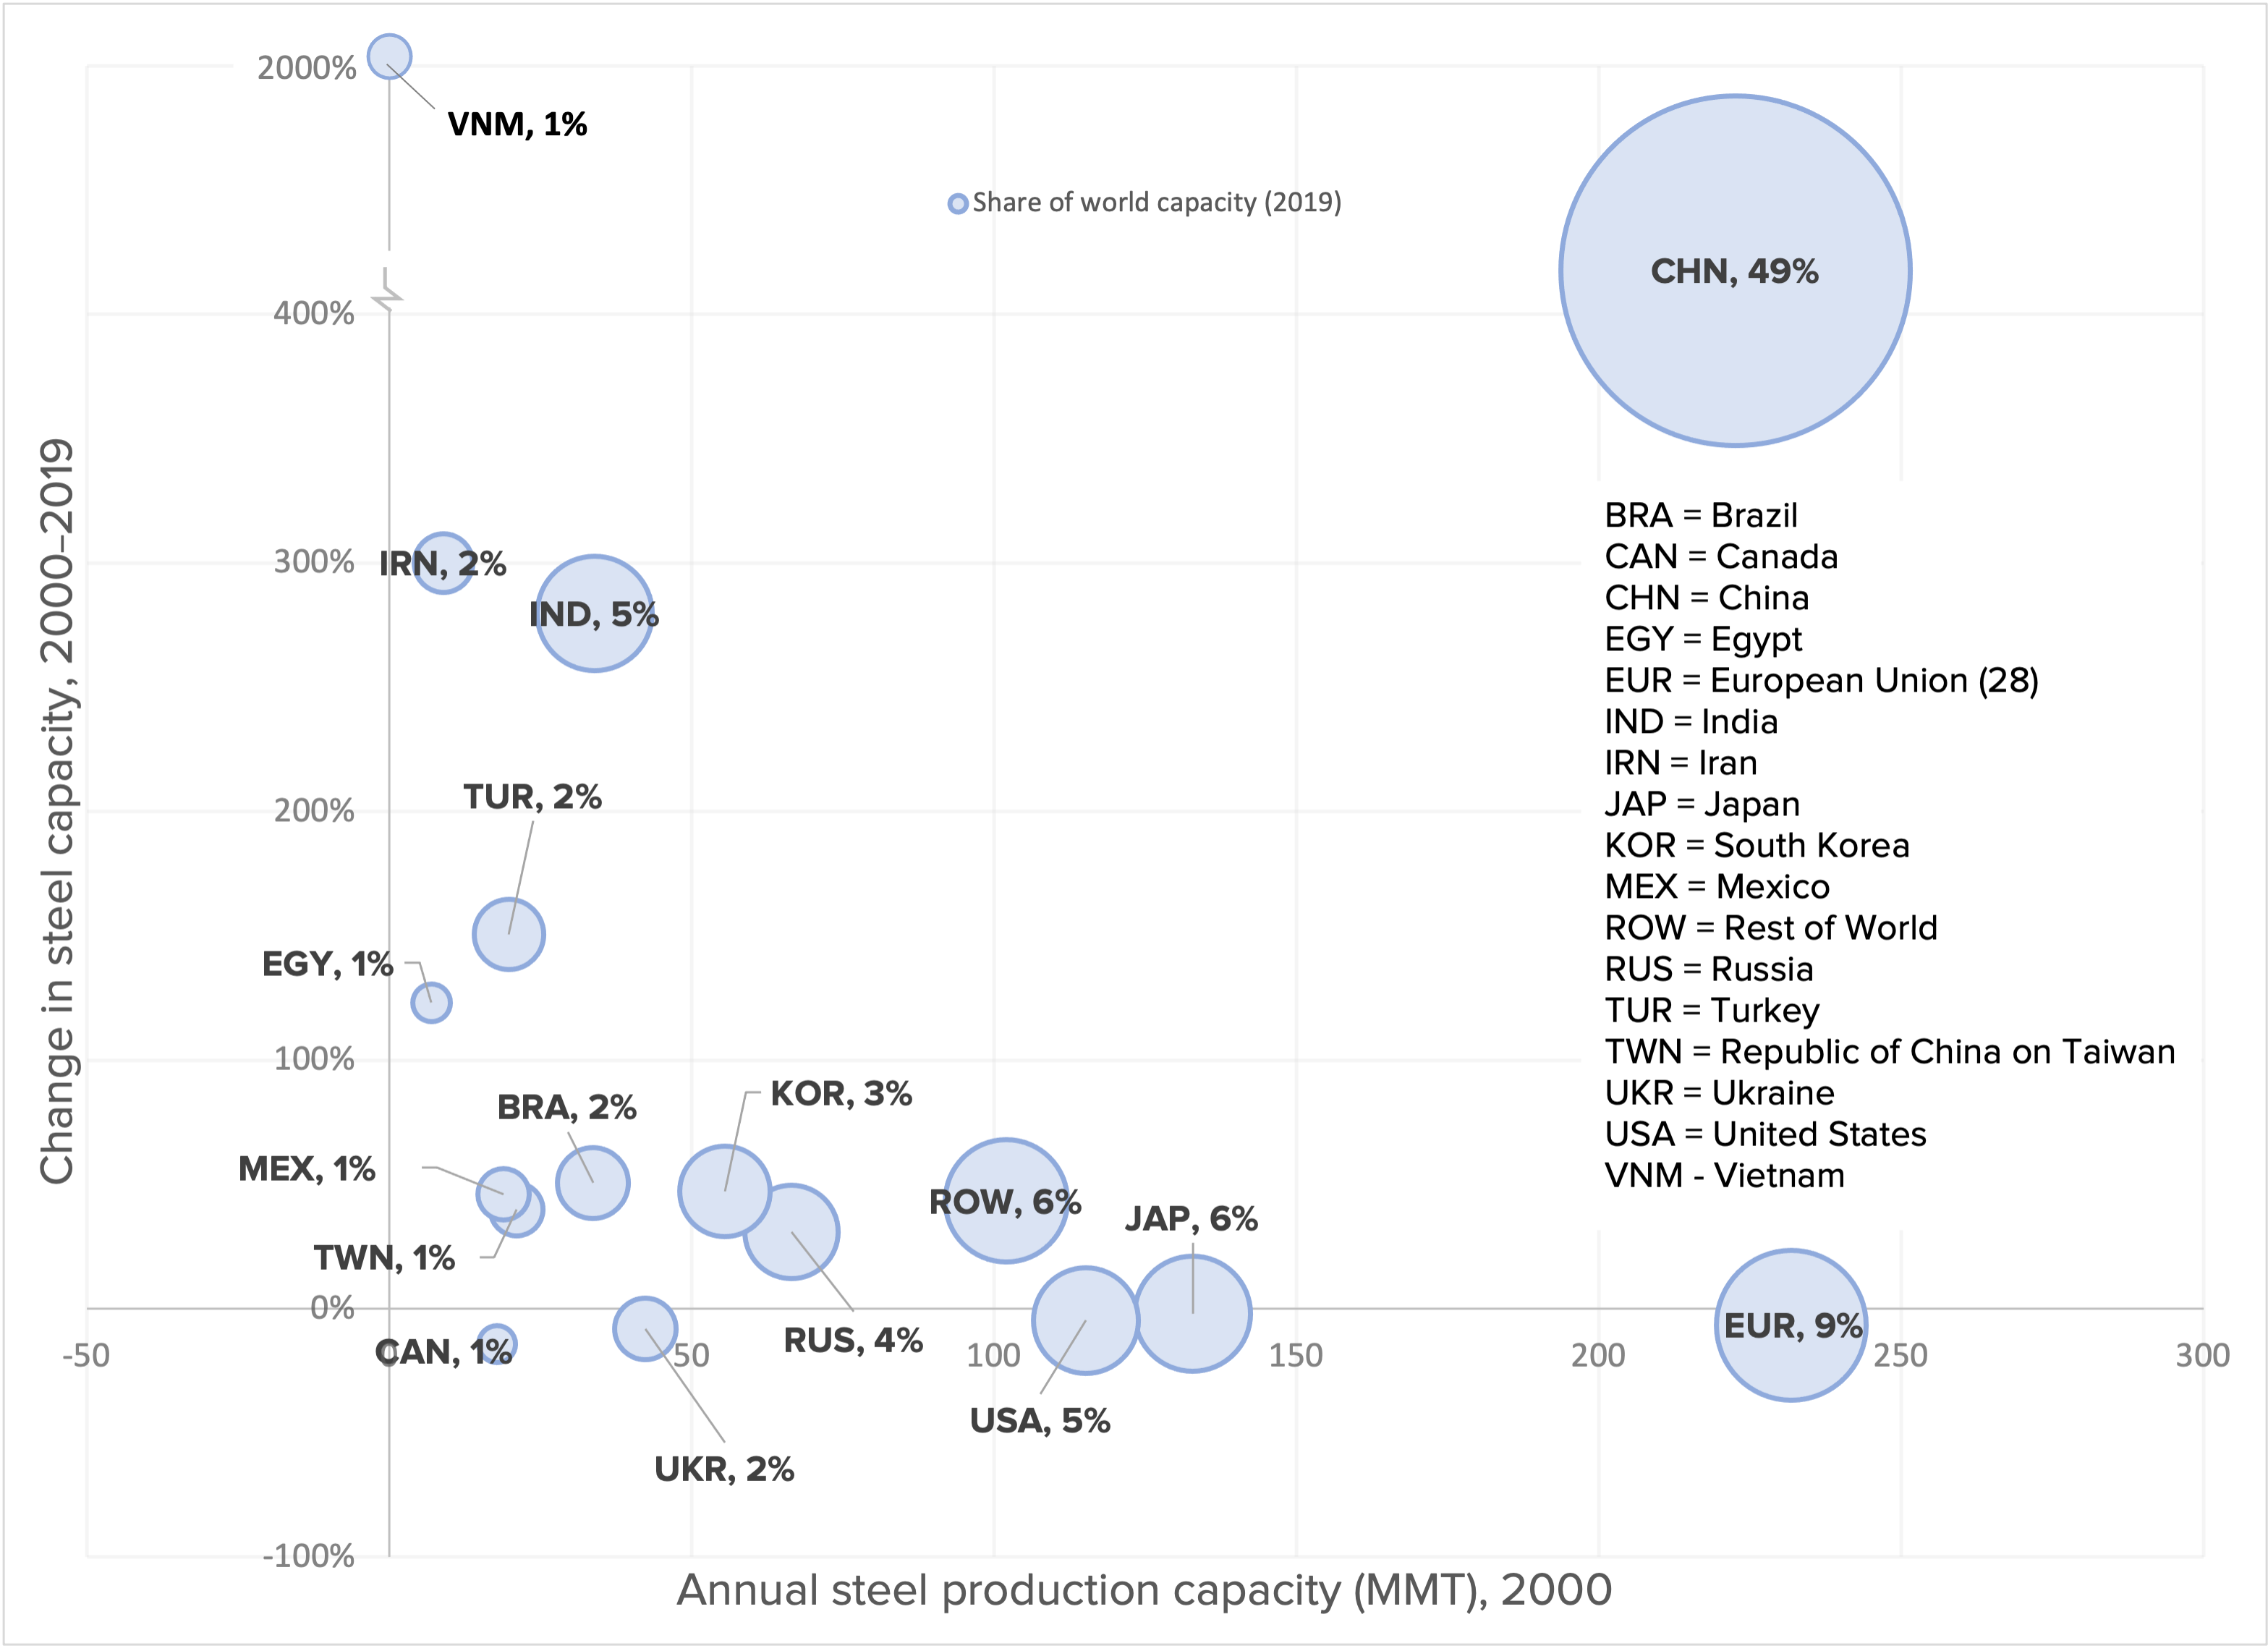 Rapid expansion of steelmaking capacity in many countries threatens U.S. steel production: Change in steel capacity by country, 2000–2019